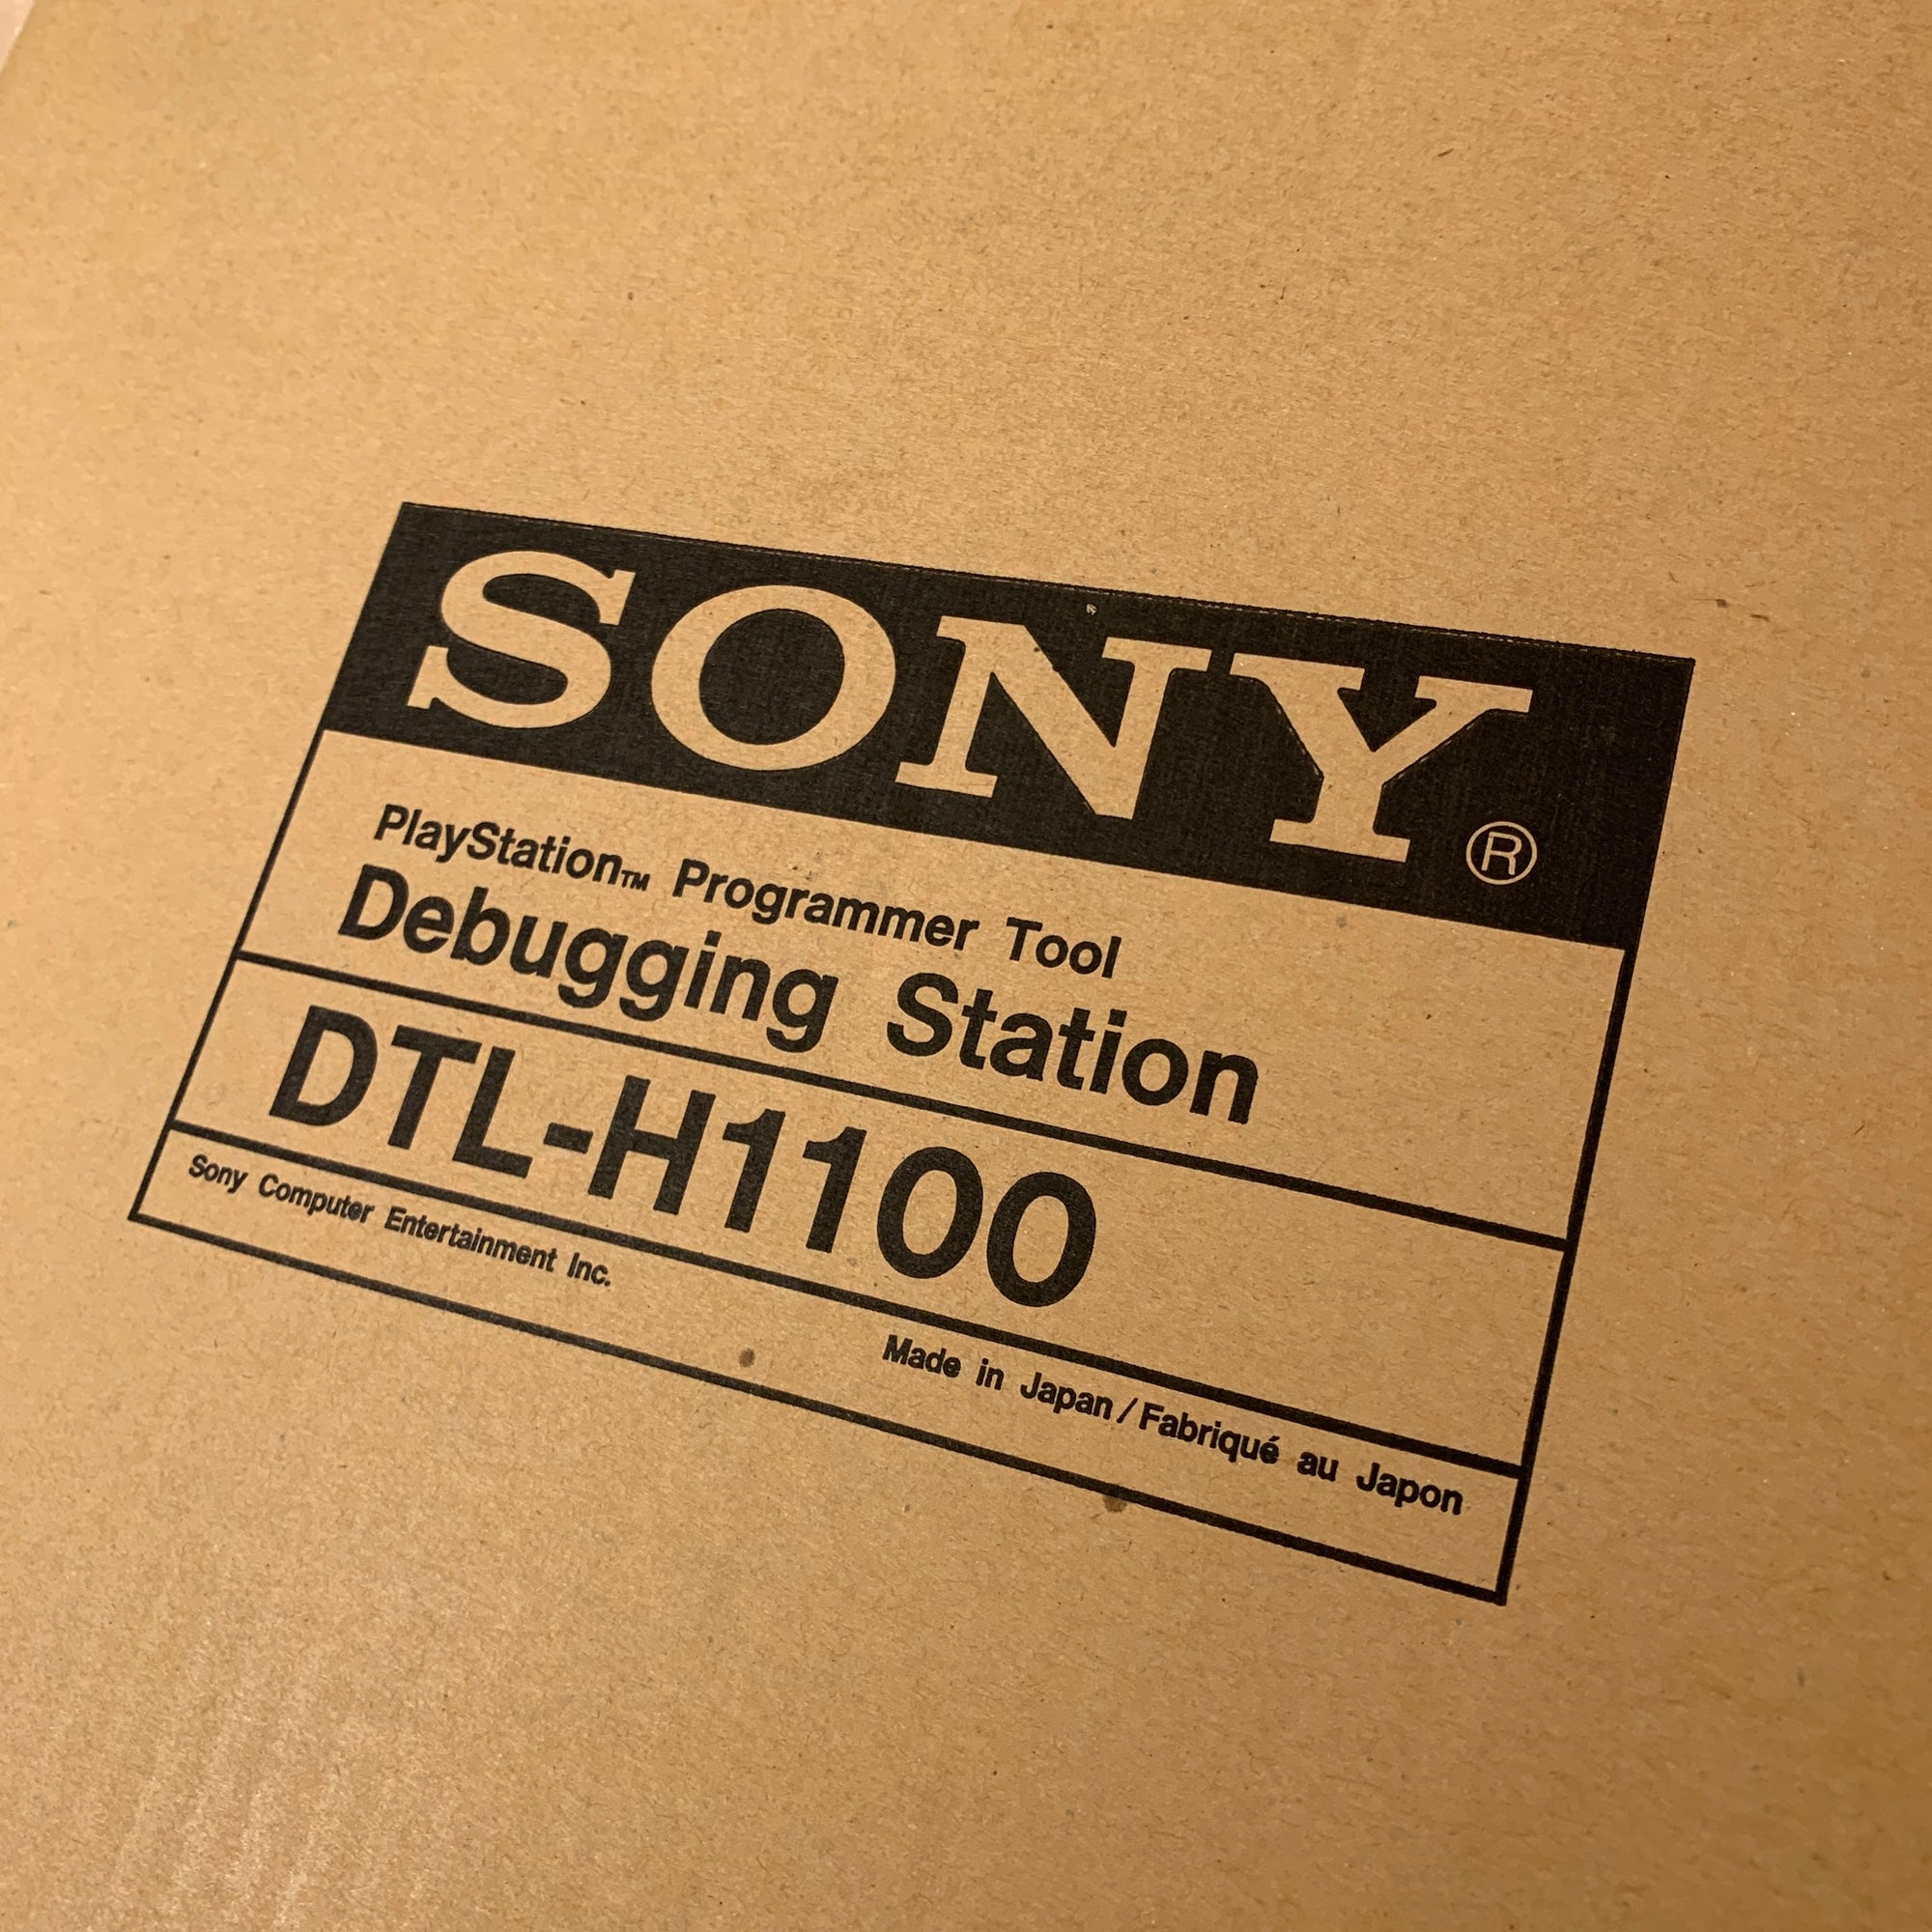 PS1 Debugging Station DTL-H1100 Unused / in box